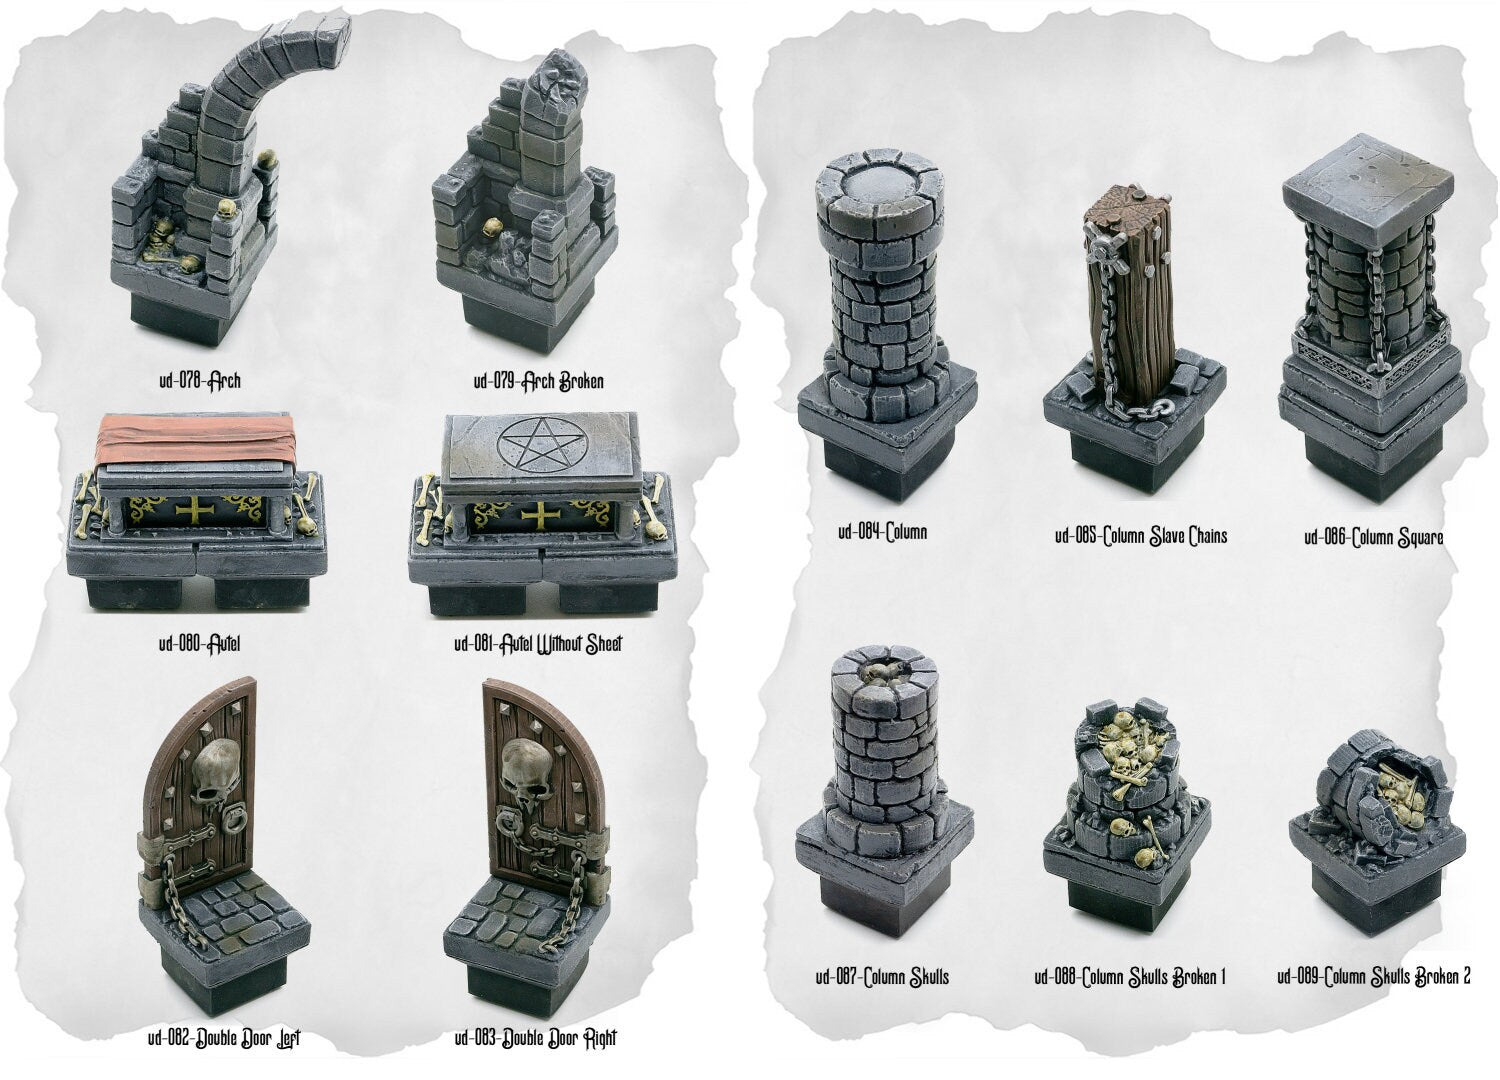 The Ultimate Dungeon | Modular Terrain | RPG Miniature for Dungeons and Dragons|Pathfinder|Tabletop | Scatter Terrain | Dungeon Blocks